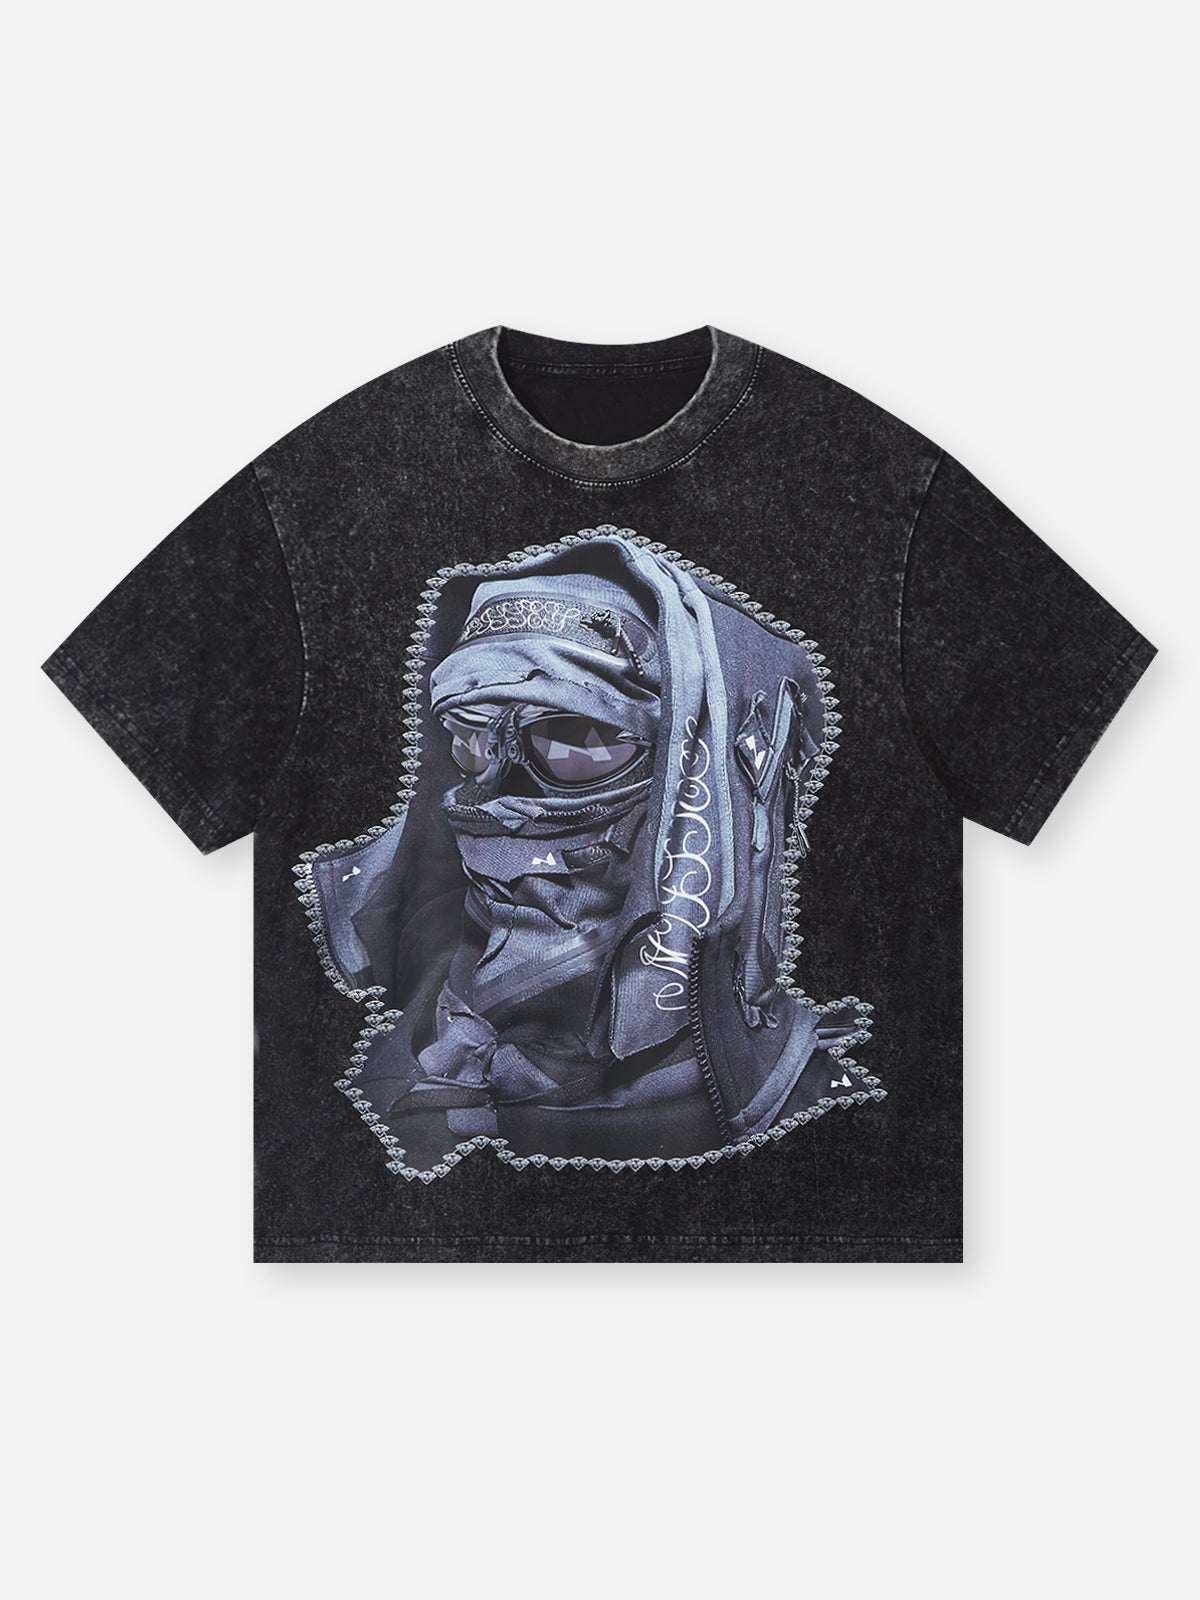 BOUNCE BACK© Gray Rock Shattered Collage Face Mask T-shirt